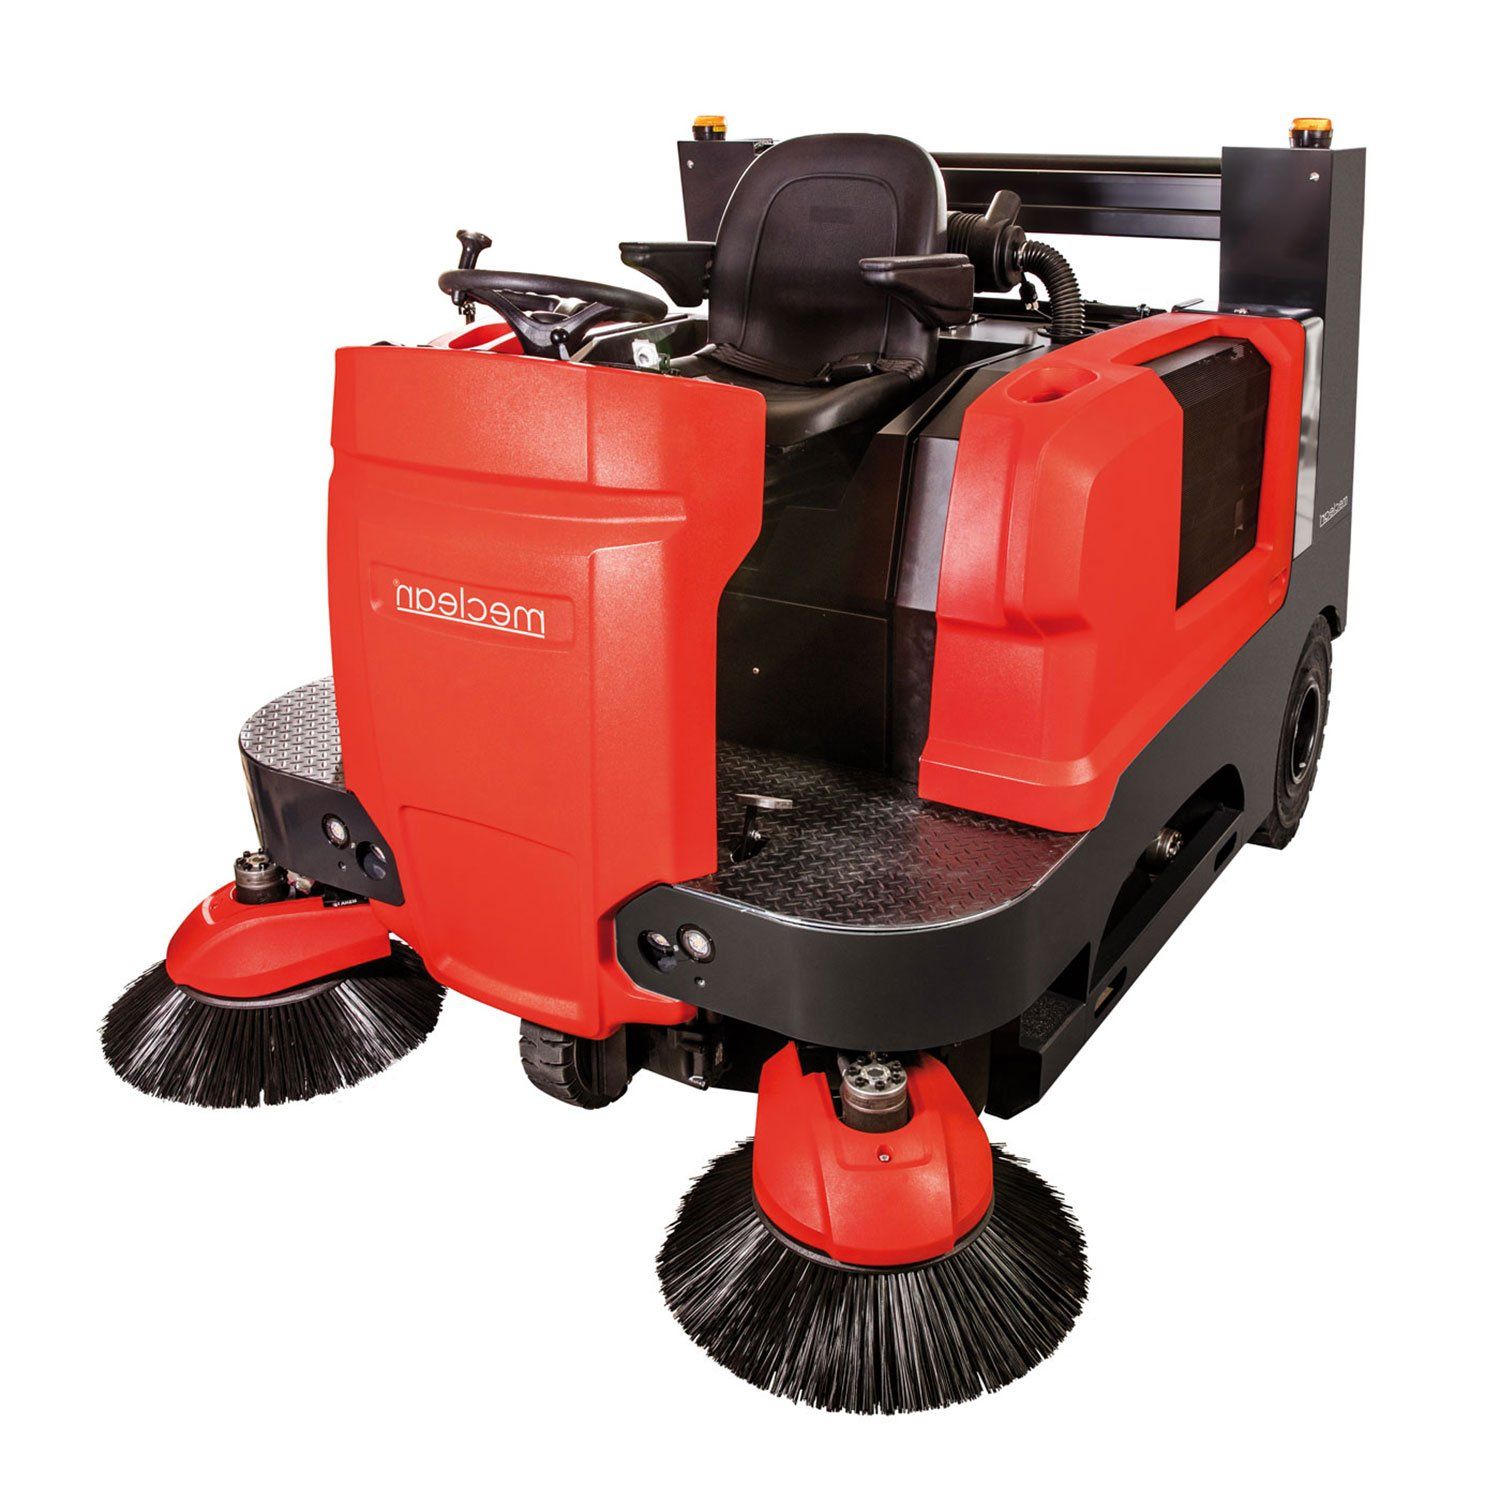 Meclean professional industrial ride-on sweeper LPG powered drive BUSTER 1800HB/G